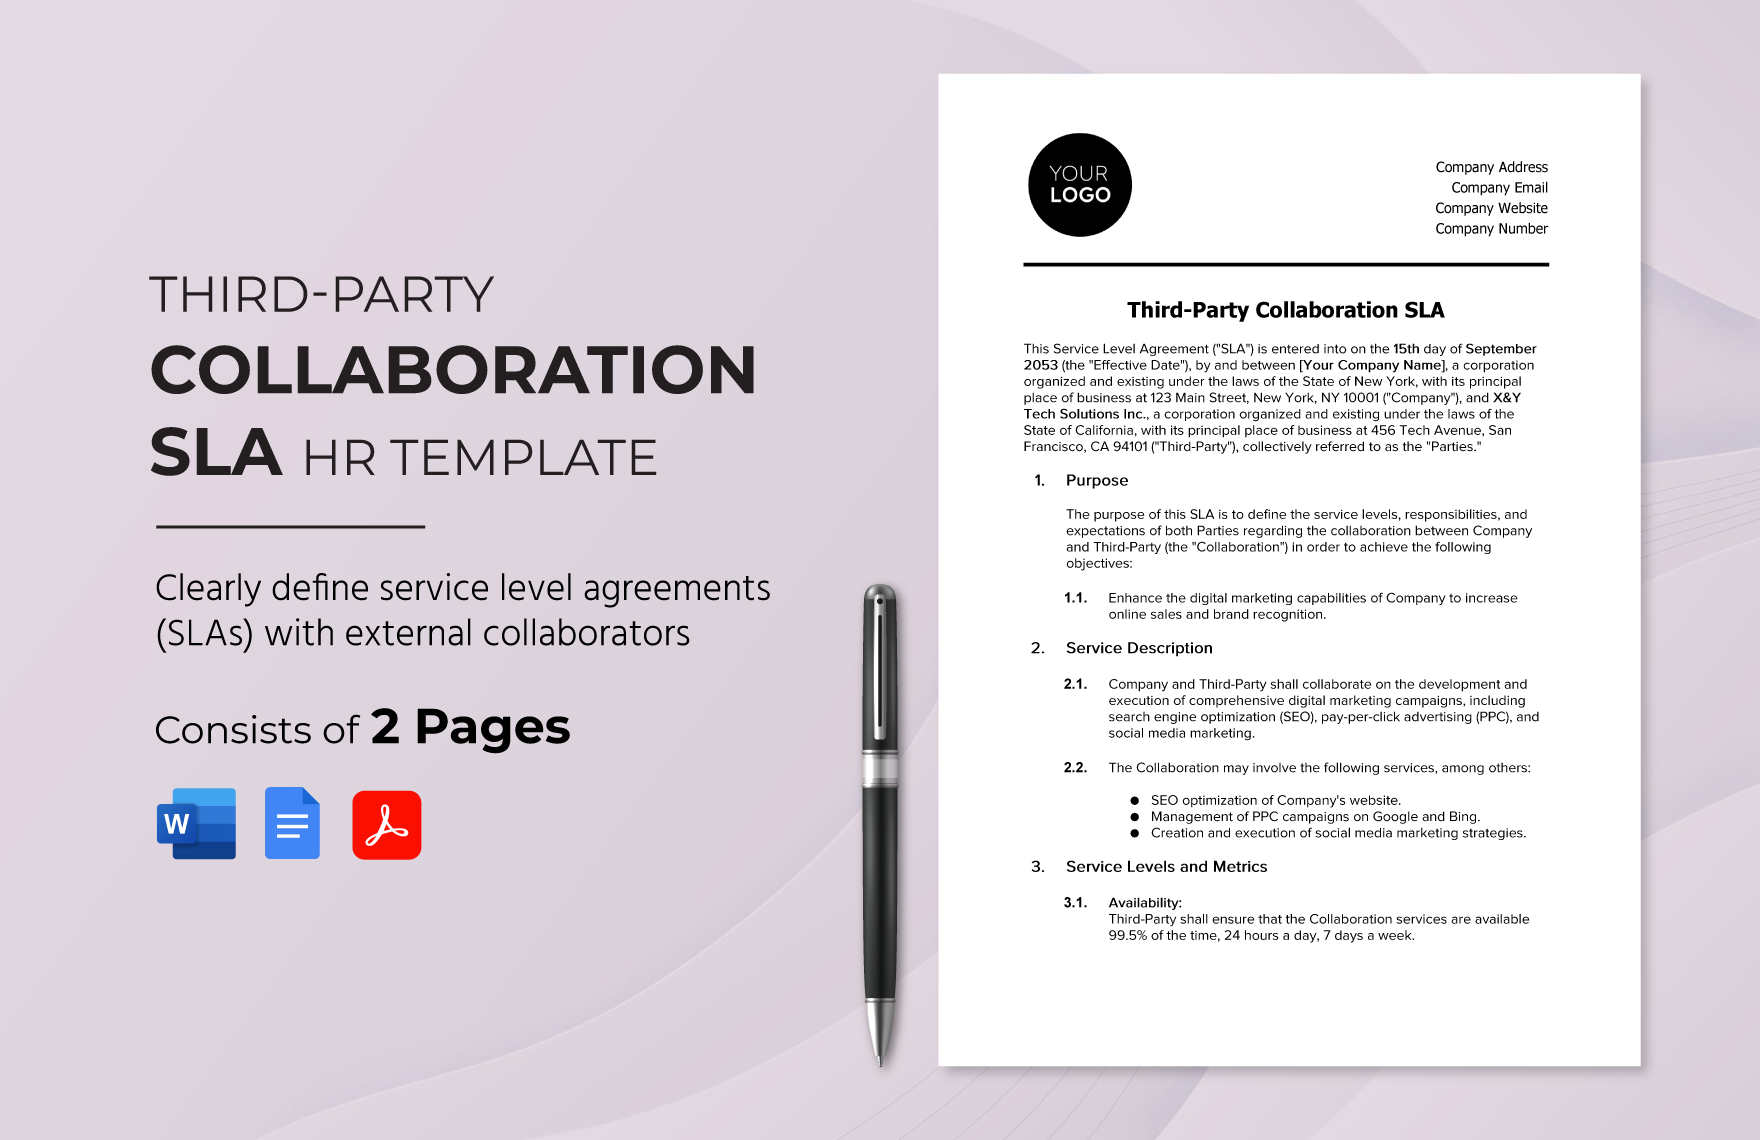 Third-Party Collaboration SLA HR Template